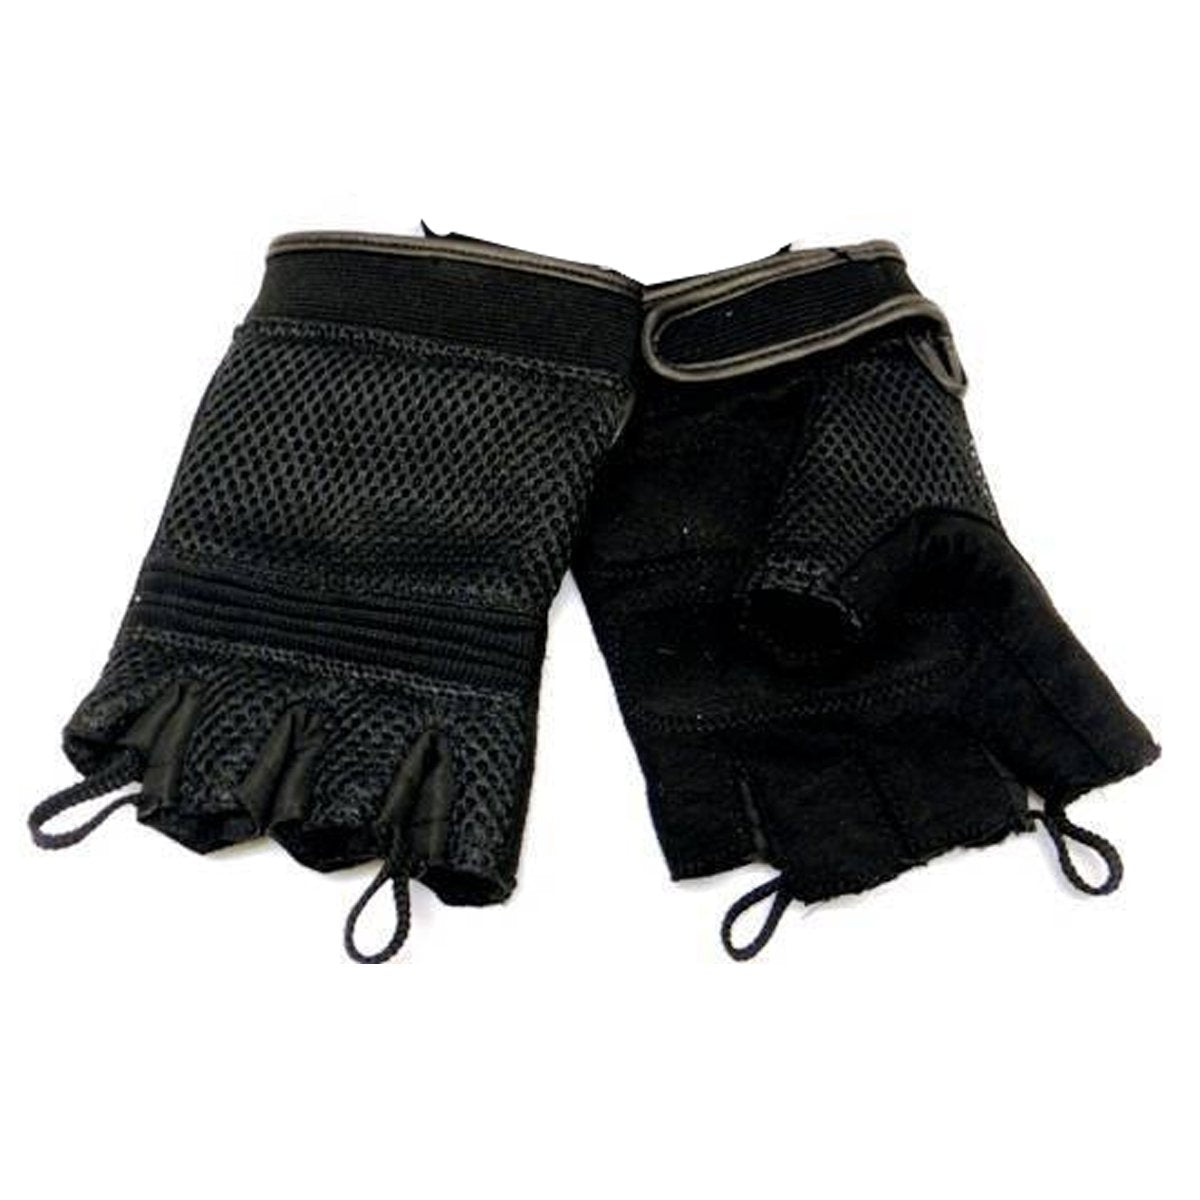 Vance Leather Mesh Fingerless Gloves with Heavy Duty Gel Suede Palm and Pull Tabs